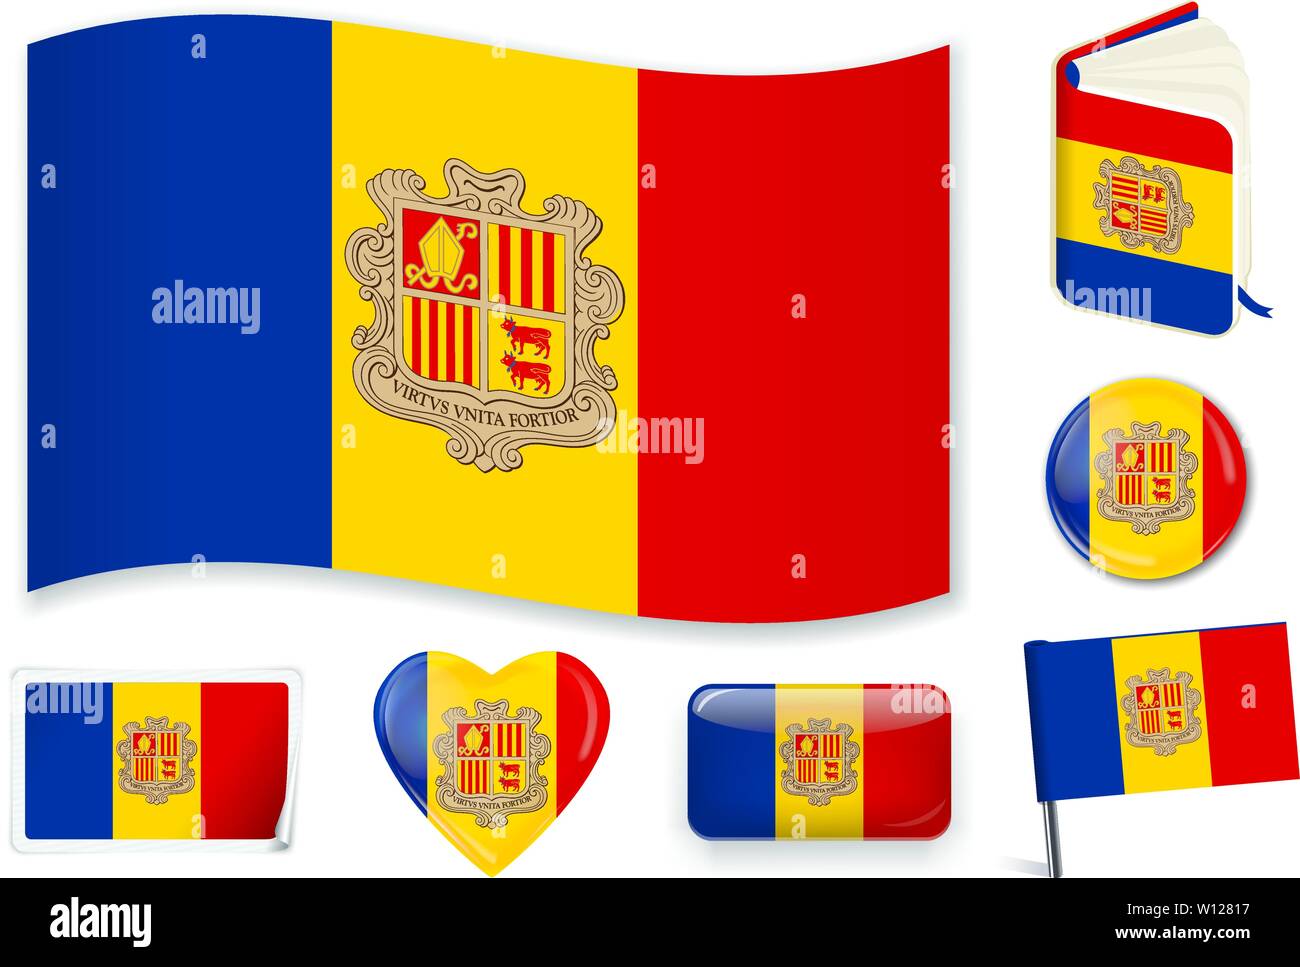 Andorra national flag in wave, book, circle, pin, button, heart and sticker shapes. Stock Vector